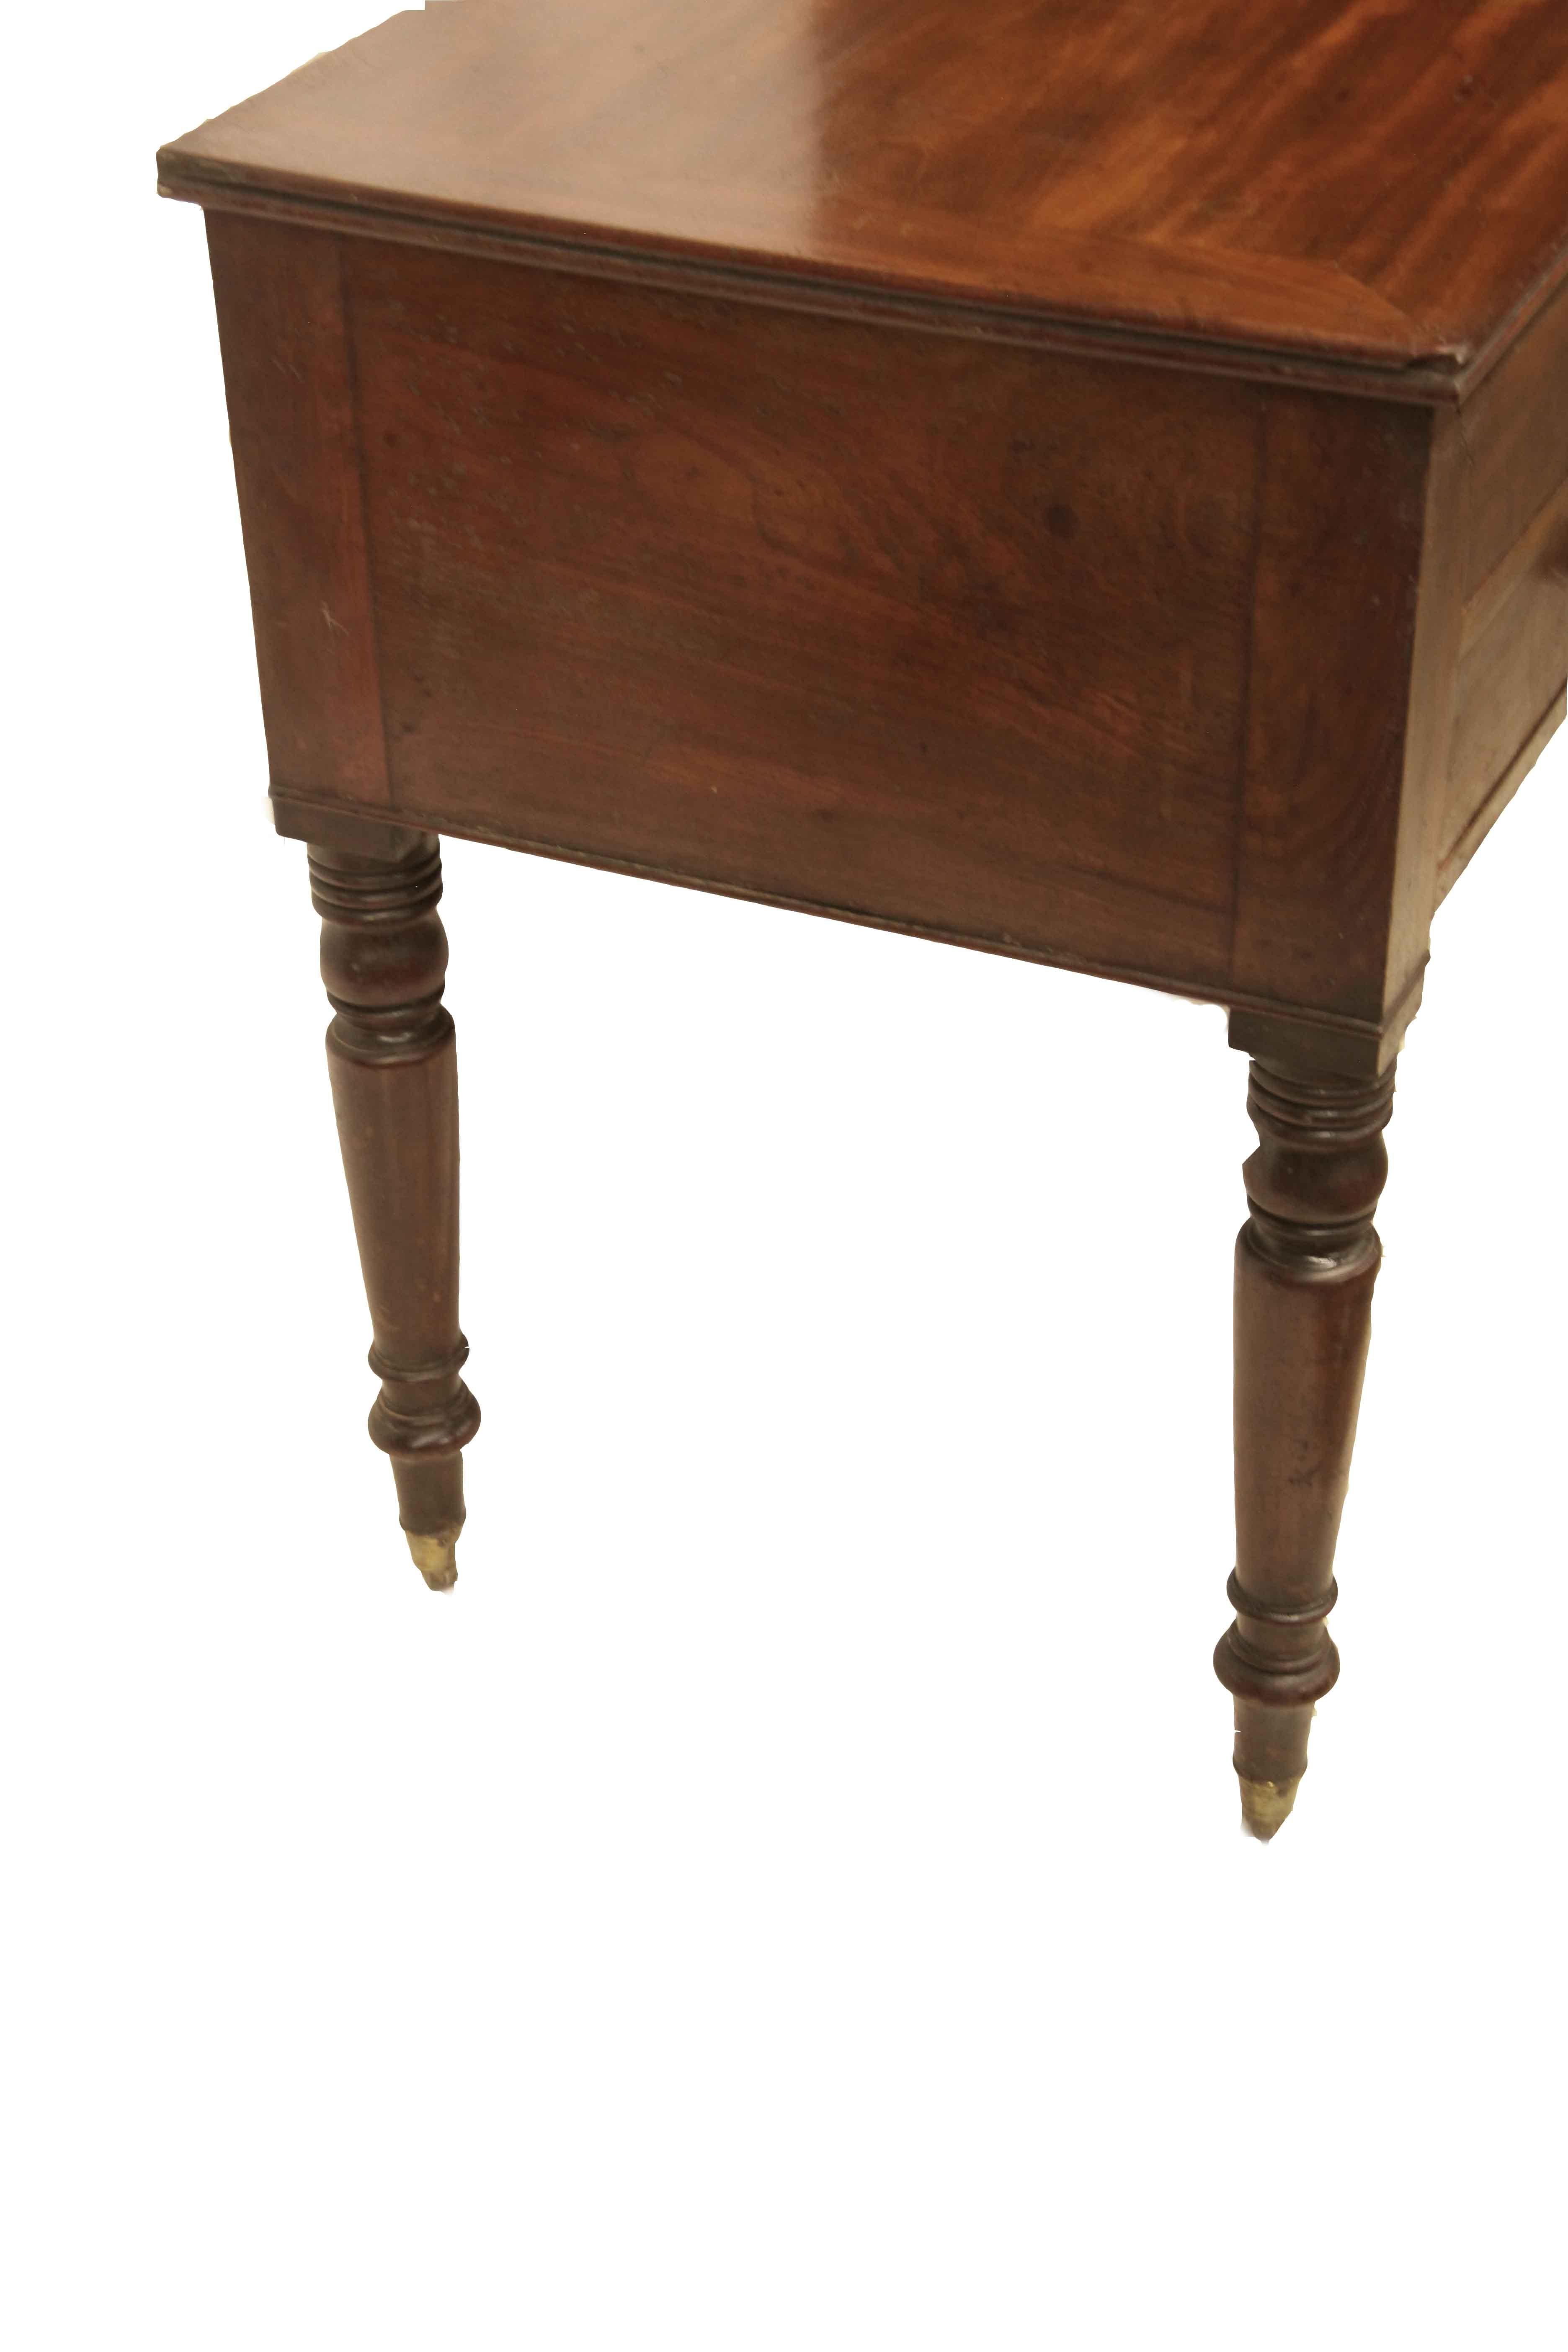 English mahogany turned leg serving table, the top has beautiful color and patina with ''breadboard'' ends. The two drawers over single long drawer provide ample storage. The legs have very pleasant turnings that terminate with brass cup castors.